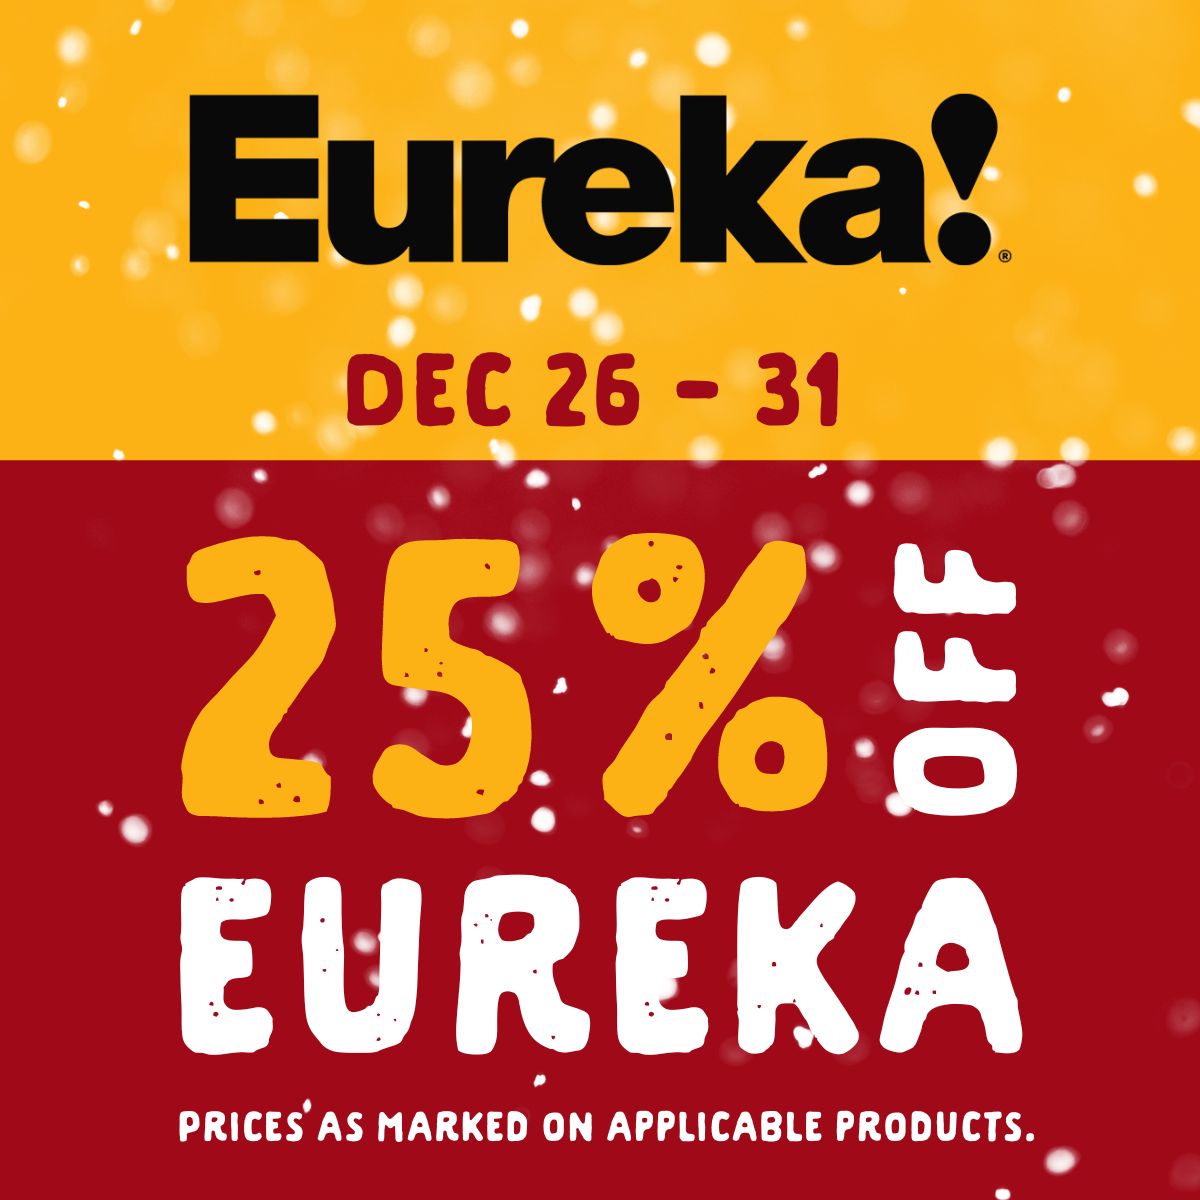 25% off Eureka from December 26 to 31. Prices as marked on applicable products.